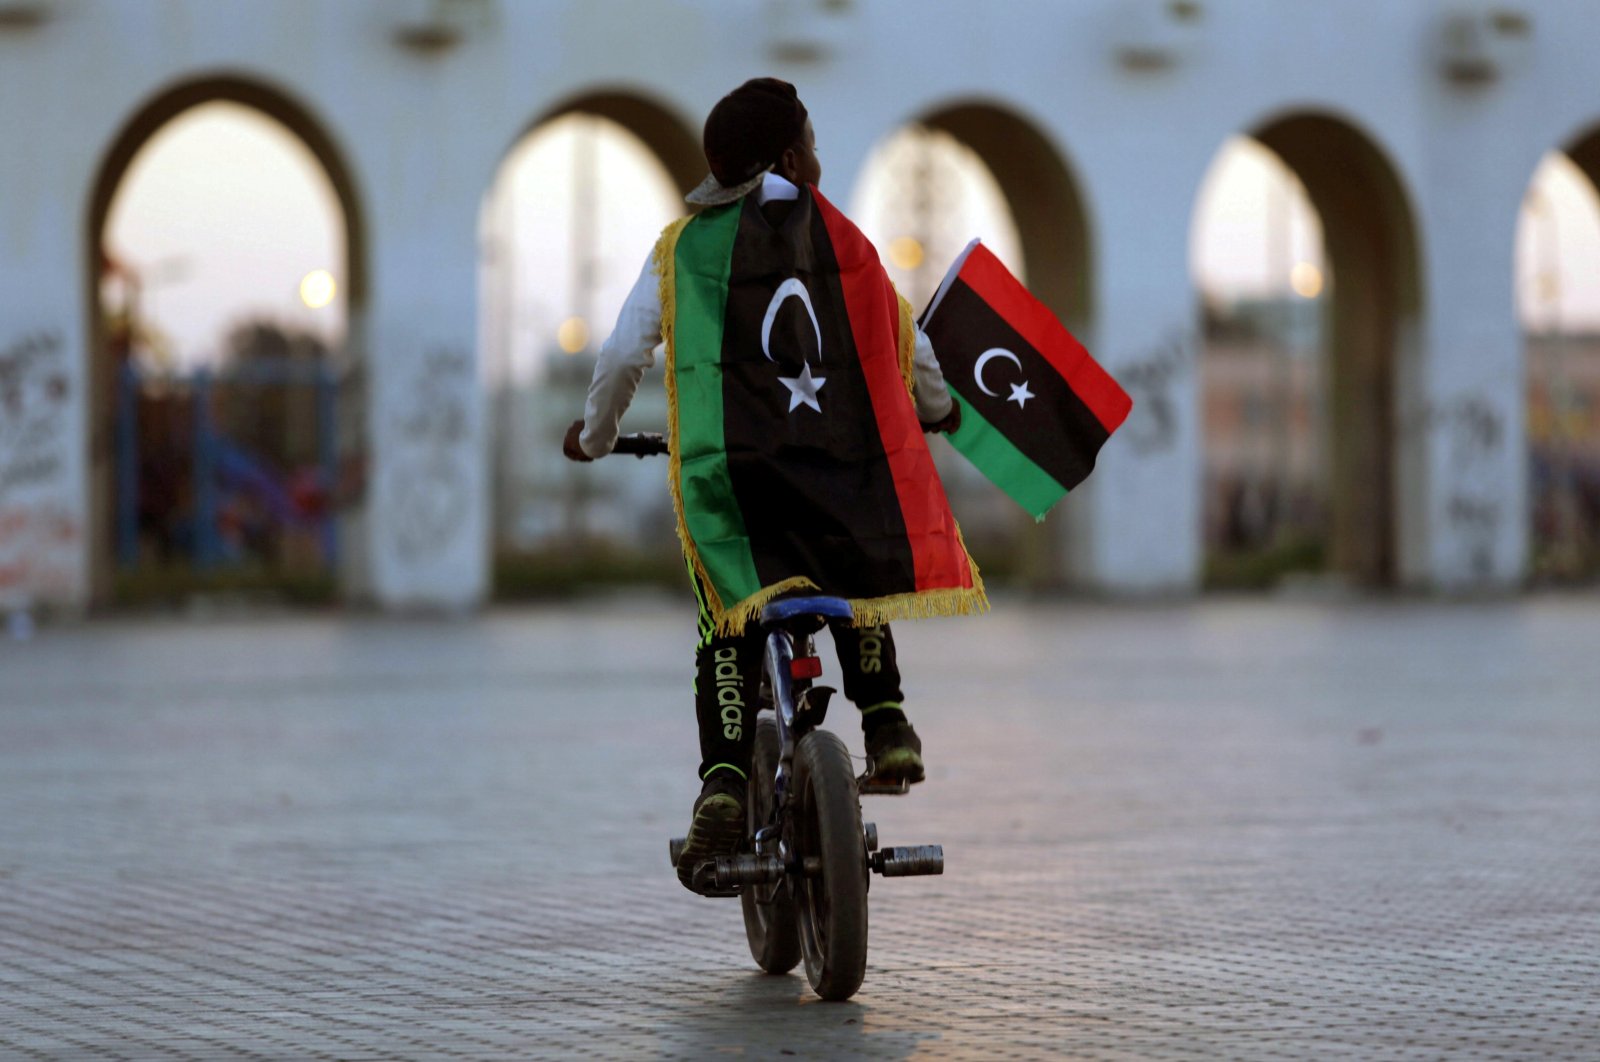 A boy wearing a Libyan flag takes part in a celebration marking the sixth anniversary of the Libyan revolution, in Benghazi, Libya, Feb. 17, 2017. (Reuters Photo)